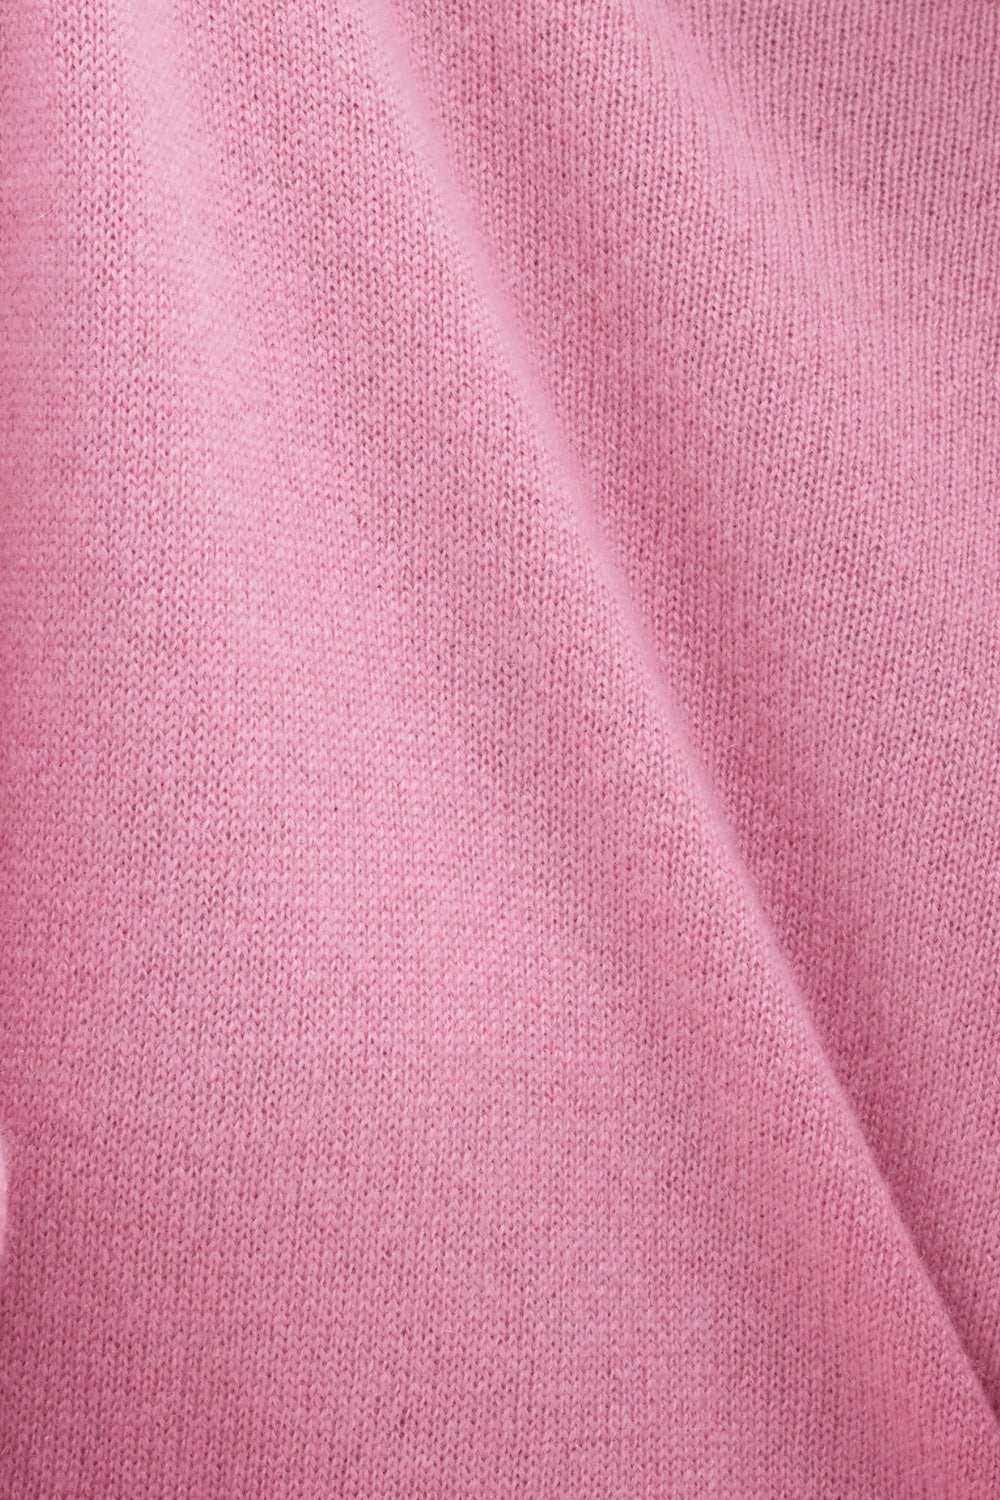 Cashmere Crew Neck Sweater in Cameo Pink